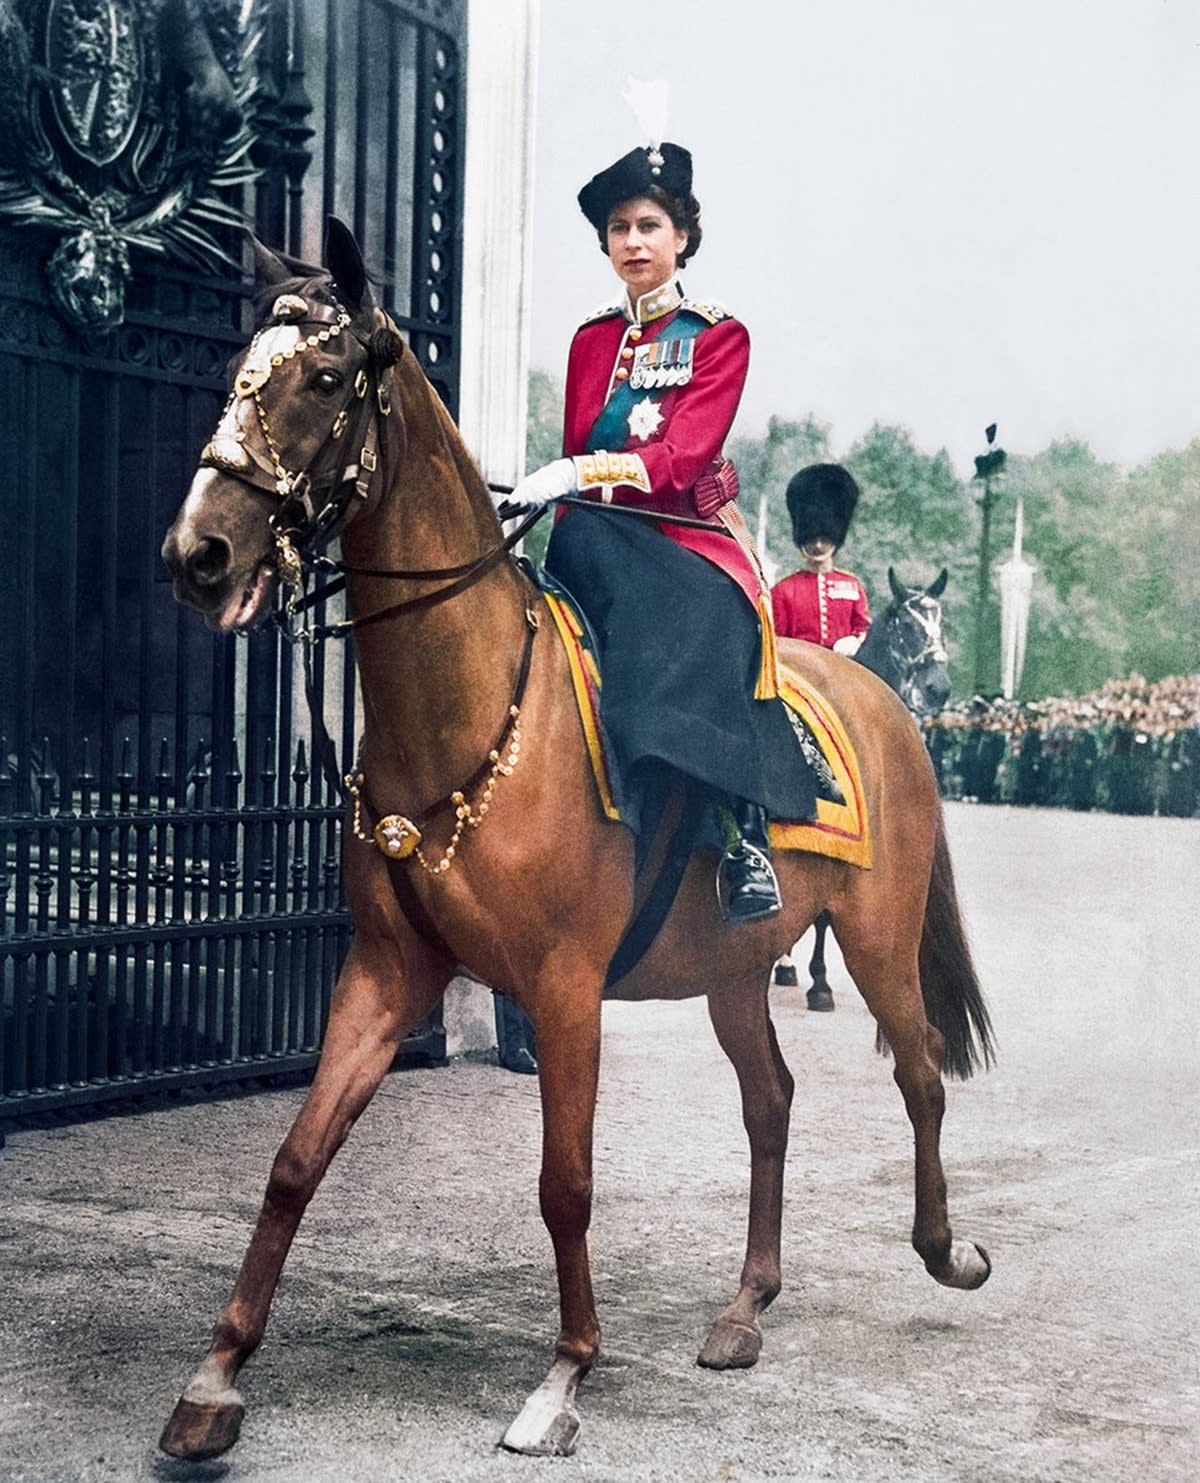 Princess Elizabeth at the Trooping the Colour in 1951. She wears the scarlet tunic of the Grenadier Guards.